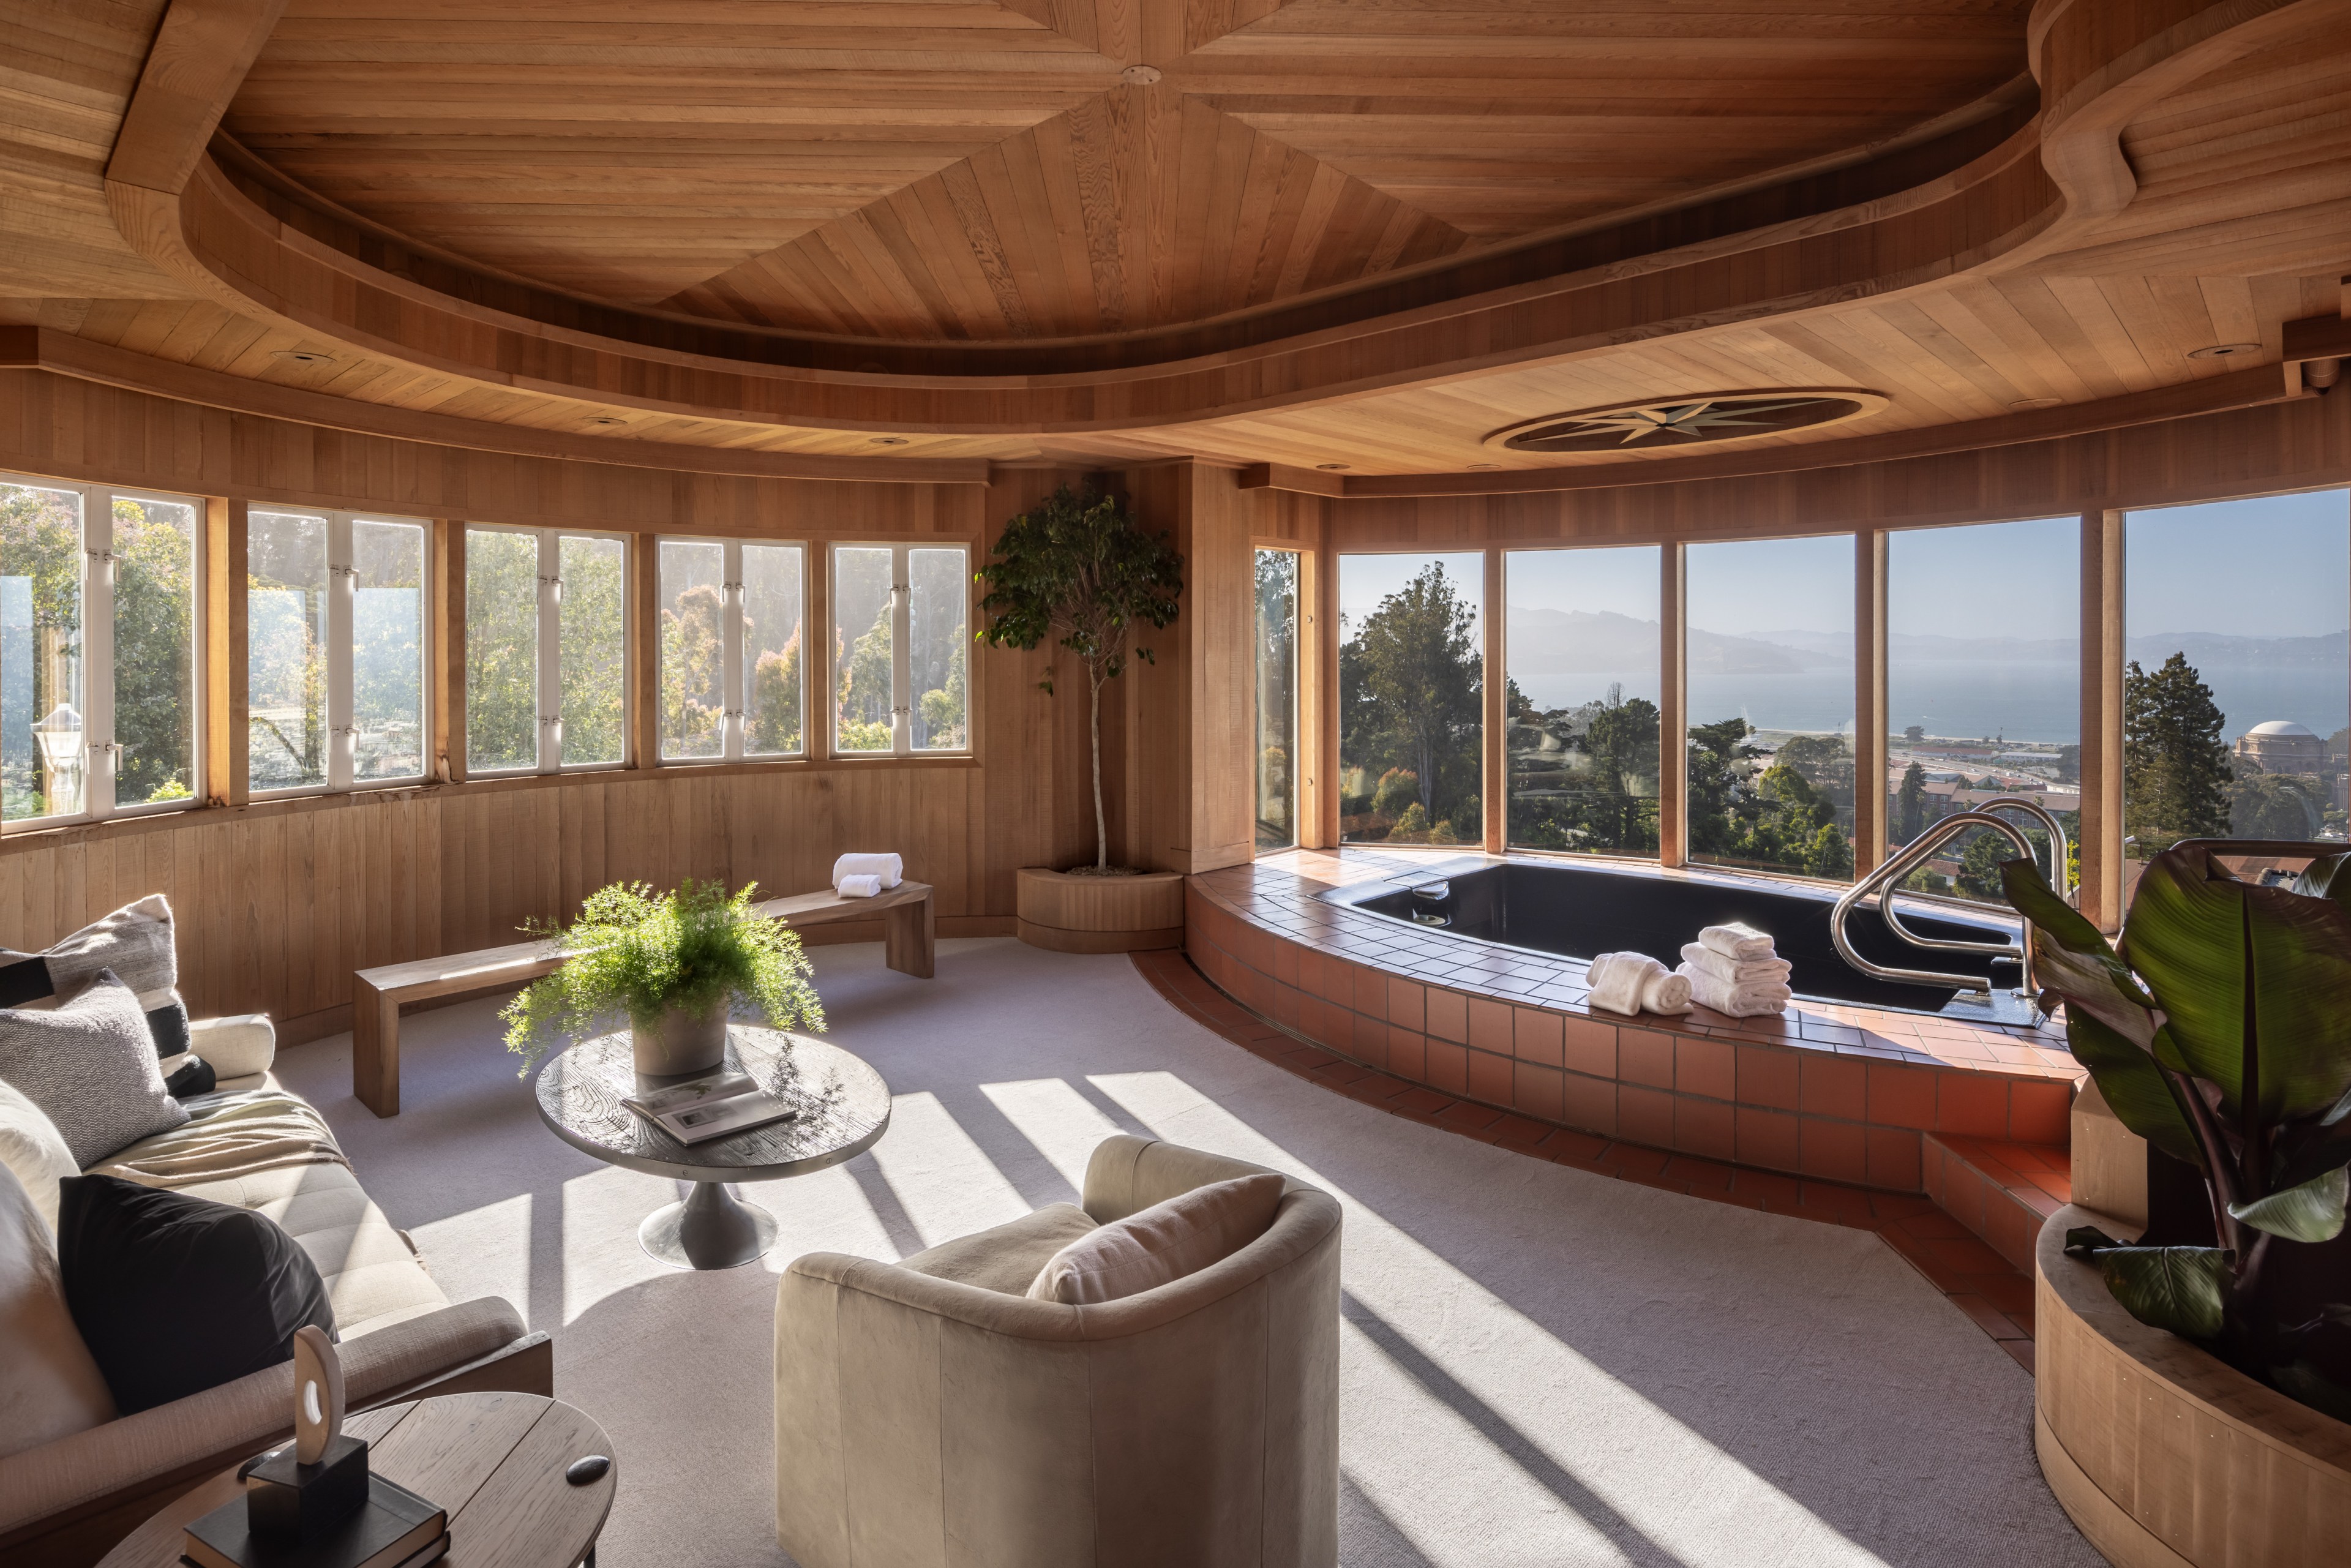 The room features a wooden interior with large windows overlooking a scenic view. It has a cozy seating area with a round table, plush chairs, and a built-in hot tub.